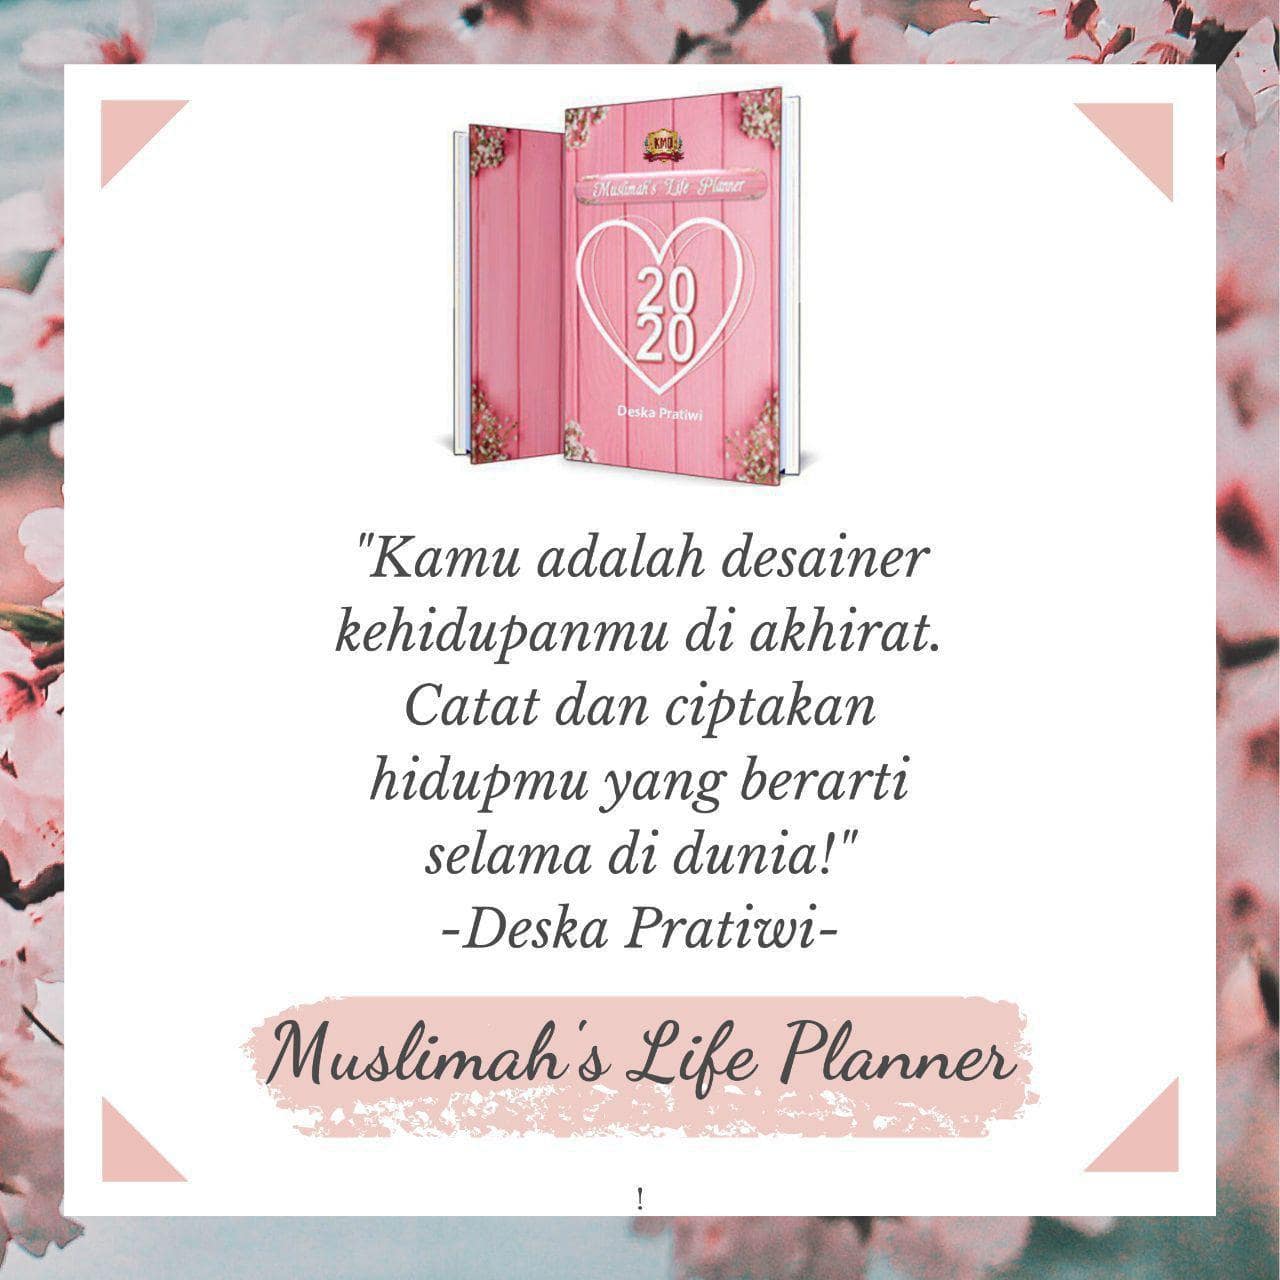 quote-muslimah-planner-2020